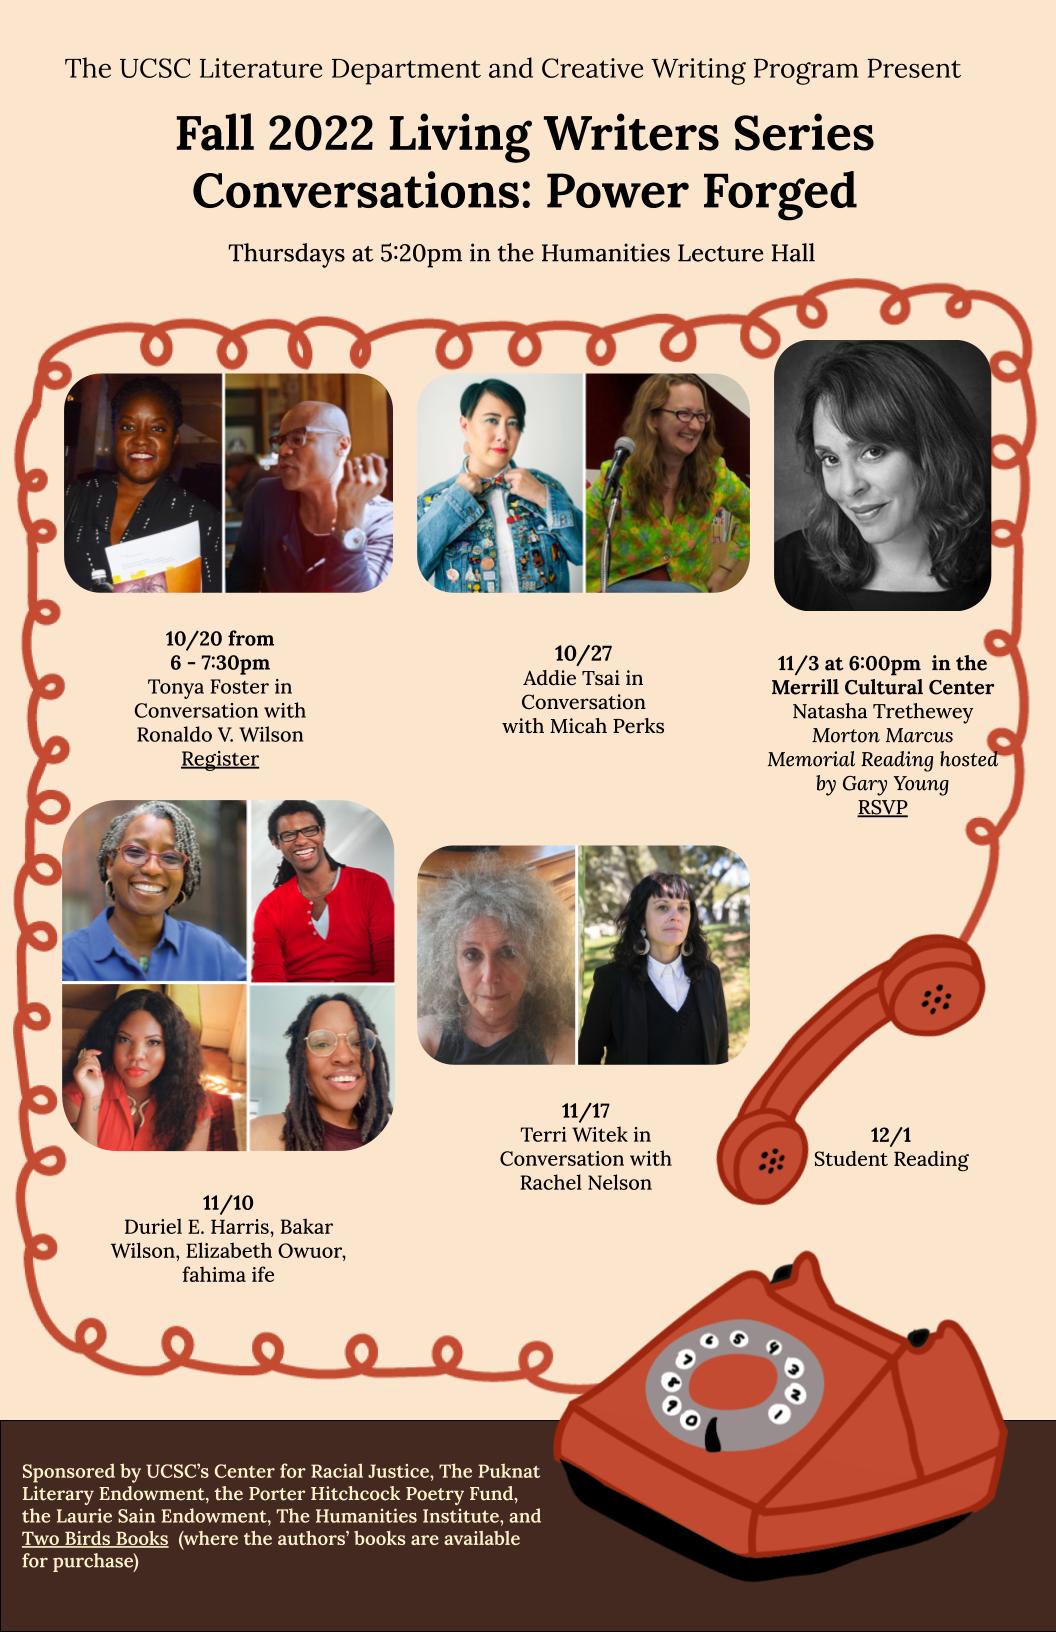 The UCSC Literature Department and Creative Writing Program Present the fall 2022 Living Writers Series.